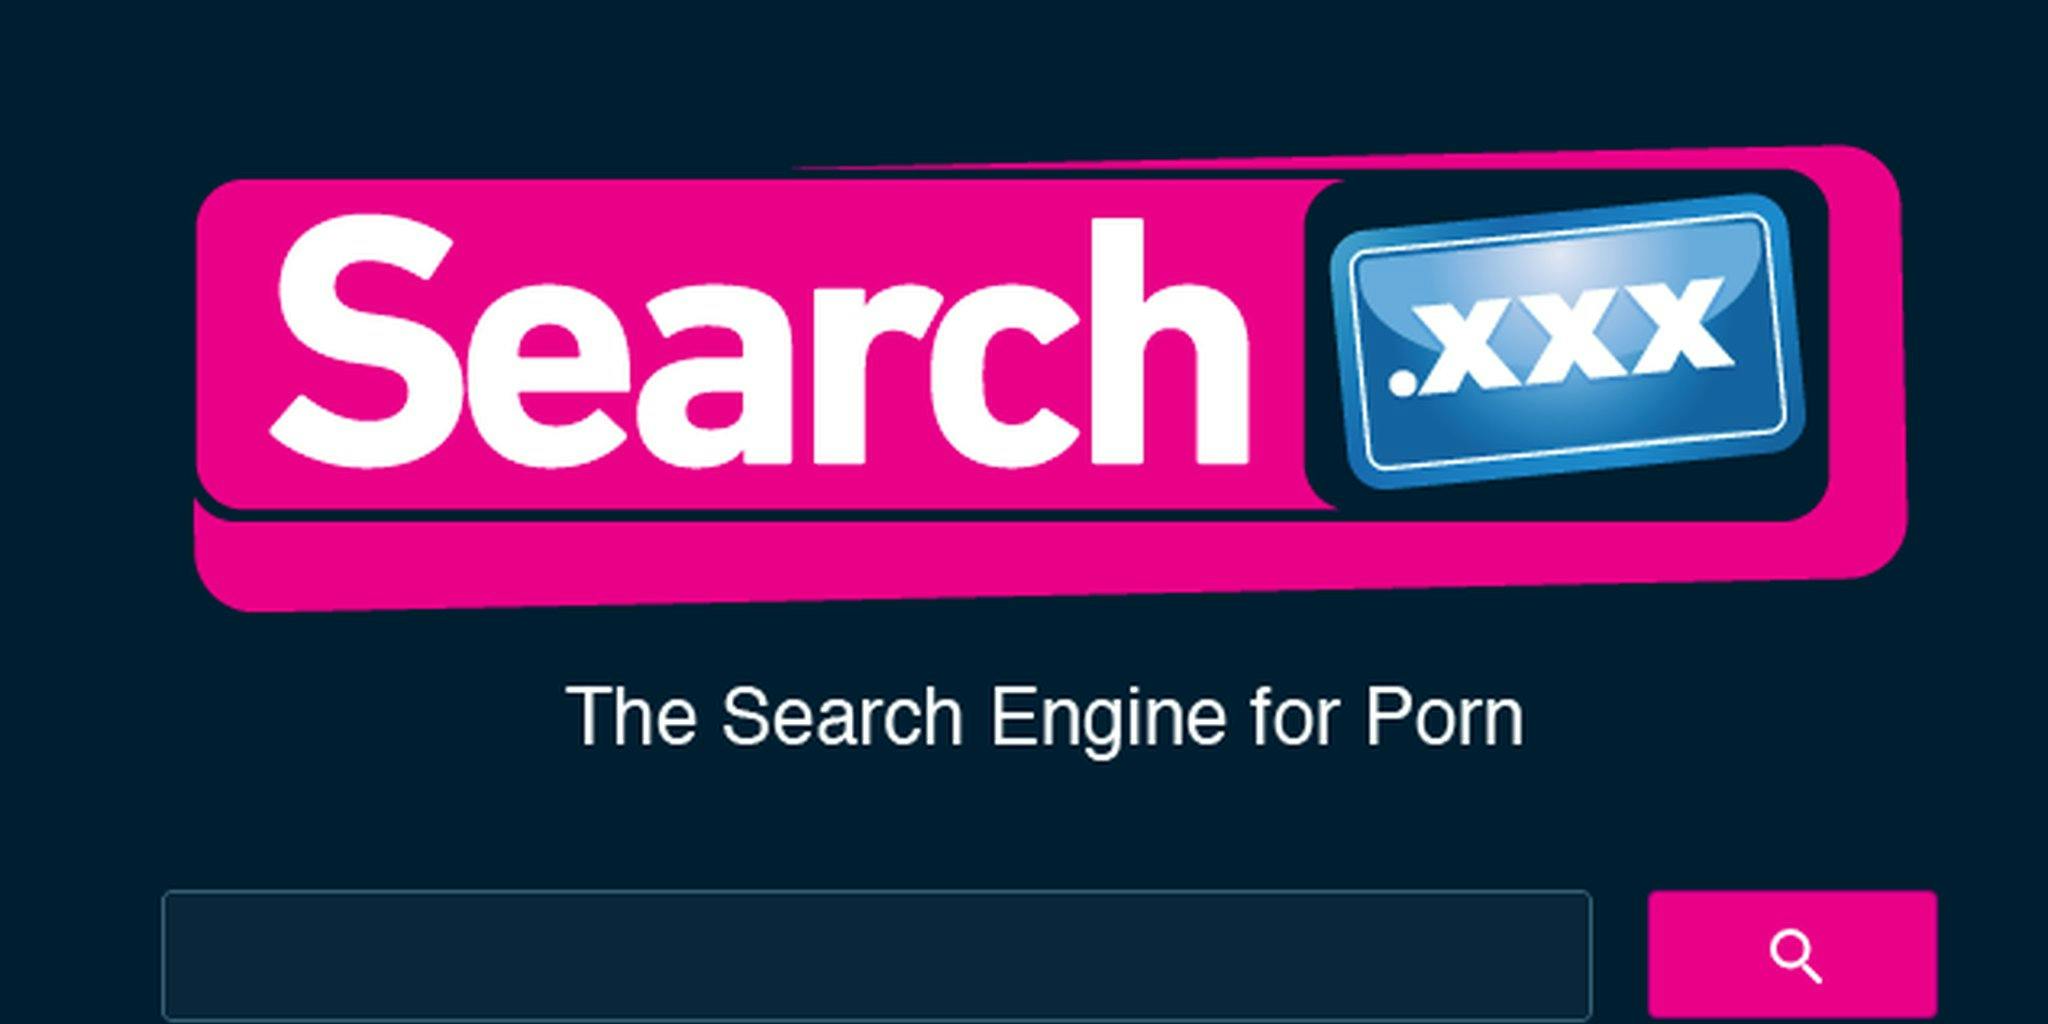 Search.xxx wants to be the Google of porn - The Daily Dot